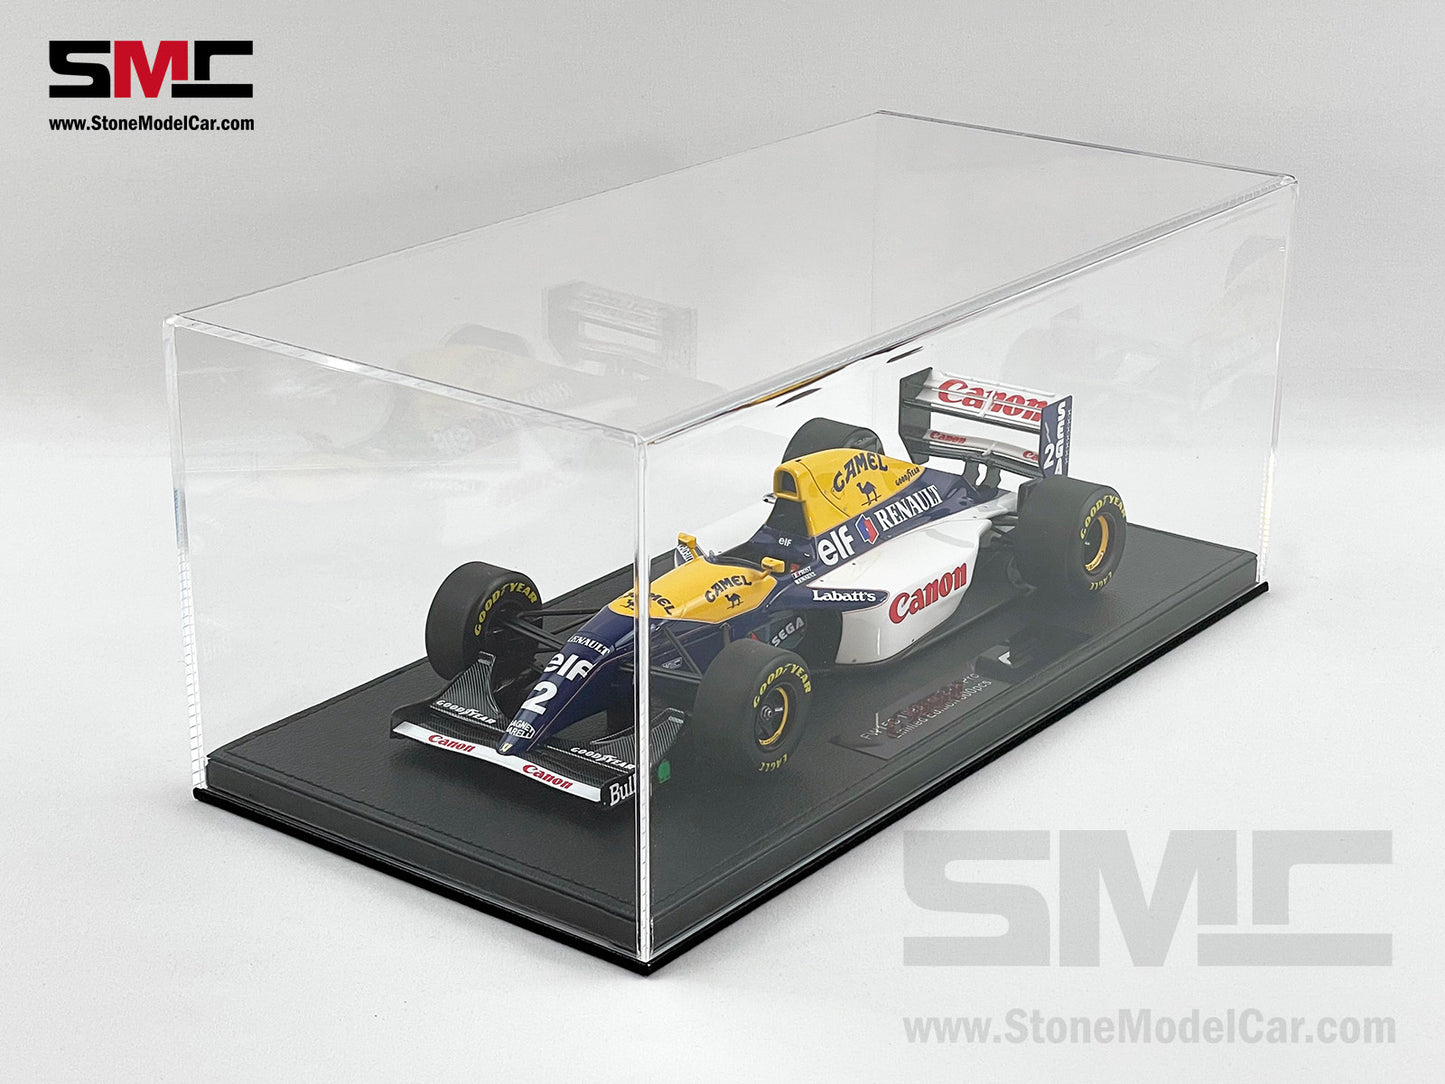 Williams F1 FW15C #2 Alain Prost 1993 World Champion 1:18 GP REPLICAS with Decal